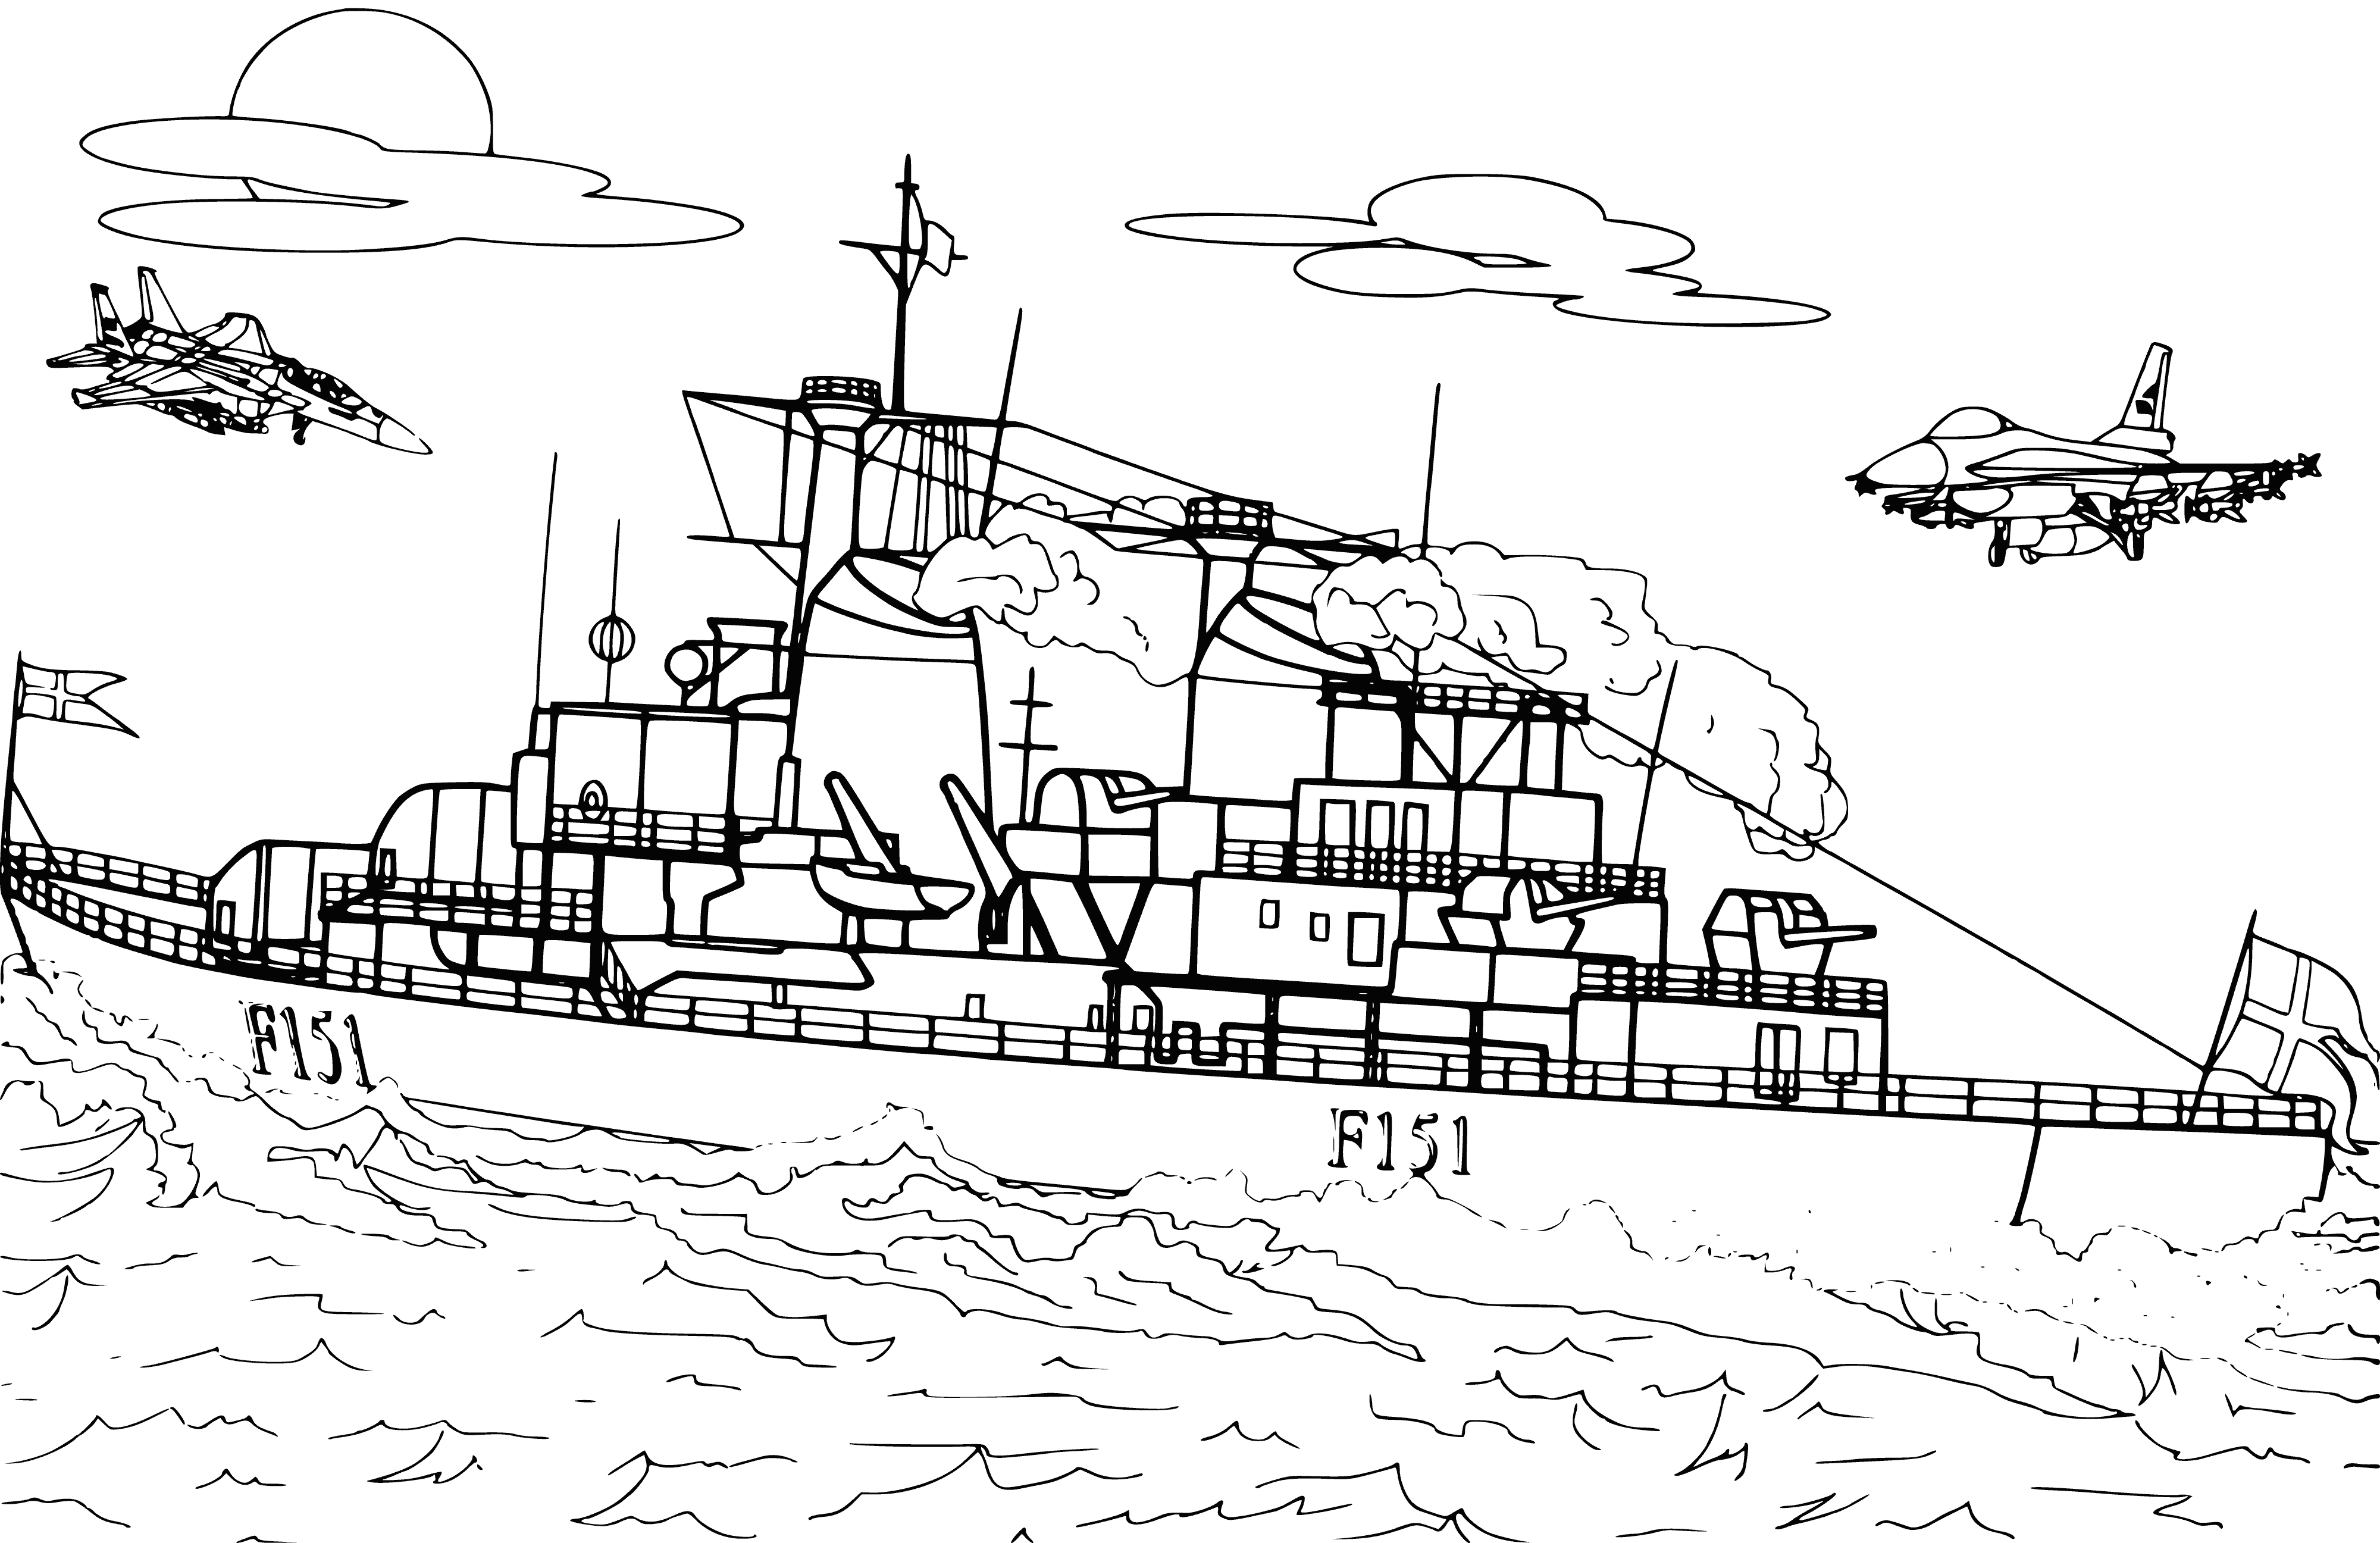 coloring page: A large sailboat docked in a calm harbor; White w/blue trim and people on deck; Other boats in the distance.